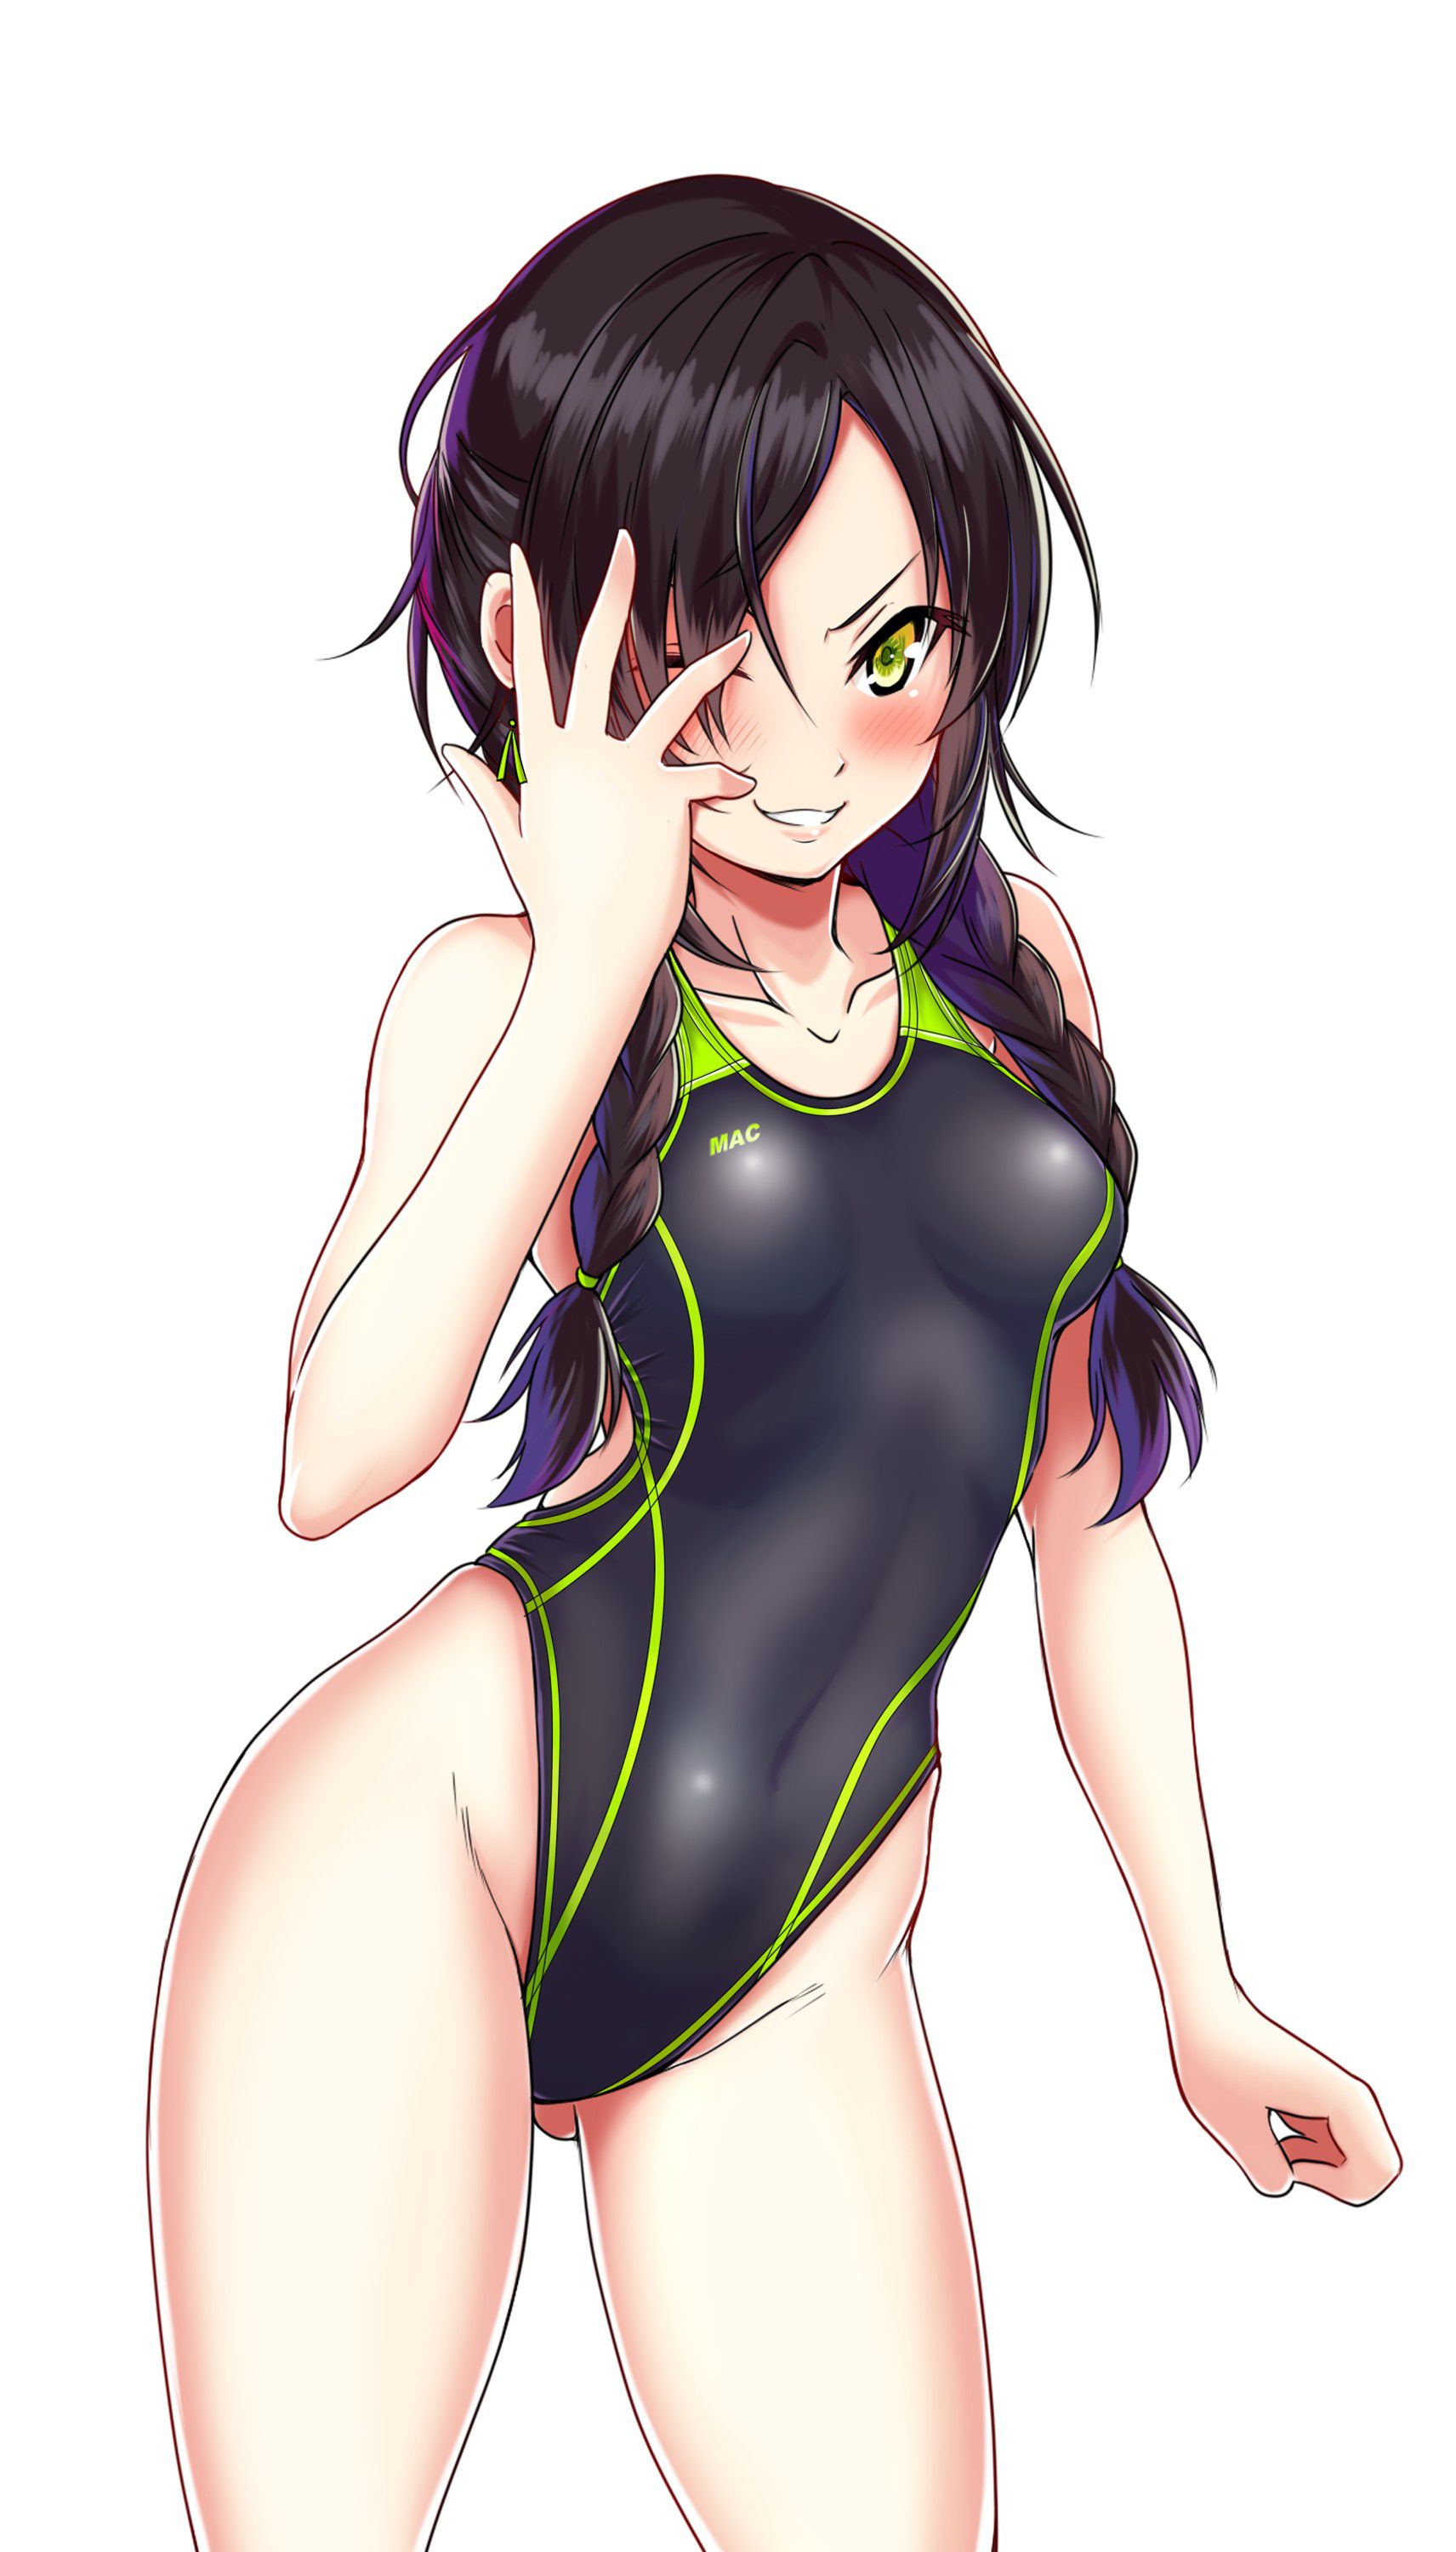 Swimming swimsuits are pitchy, but that's great, isn't it? I don't like the side that wears it. 25